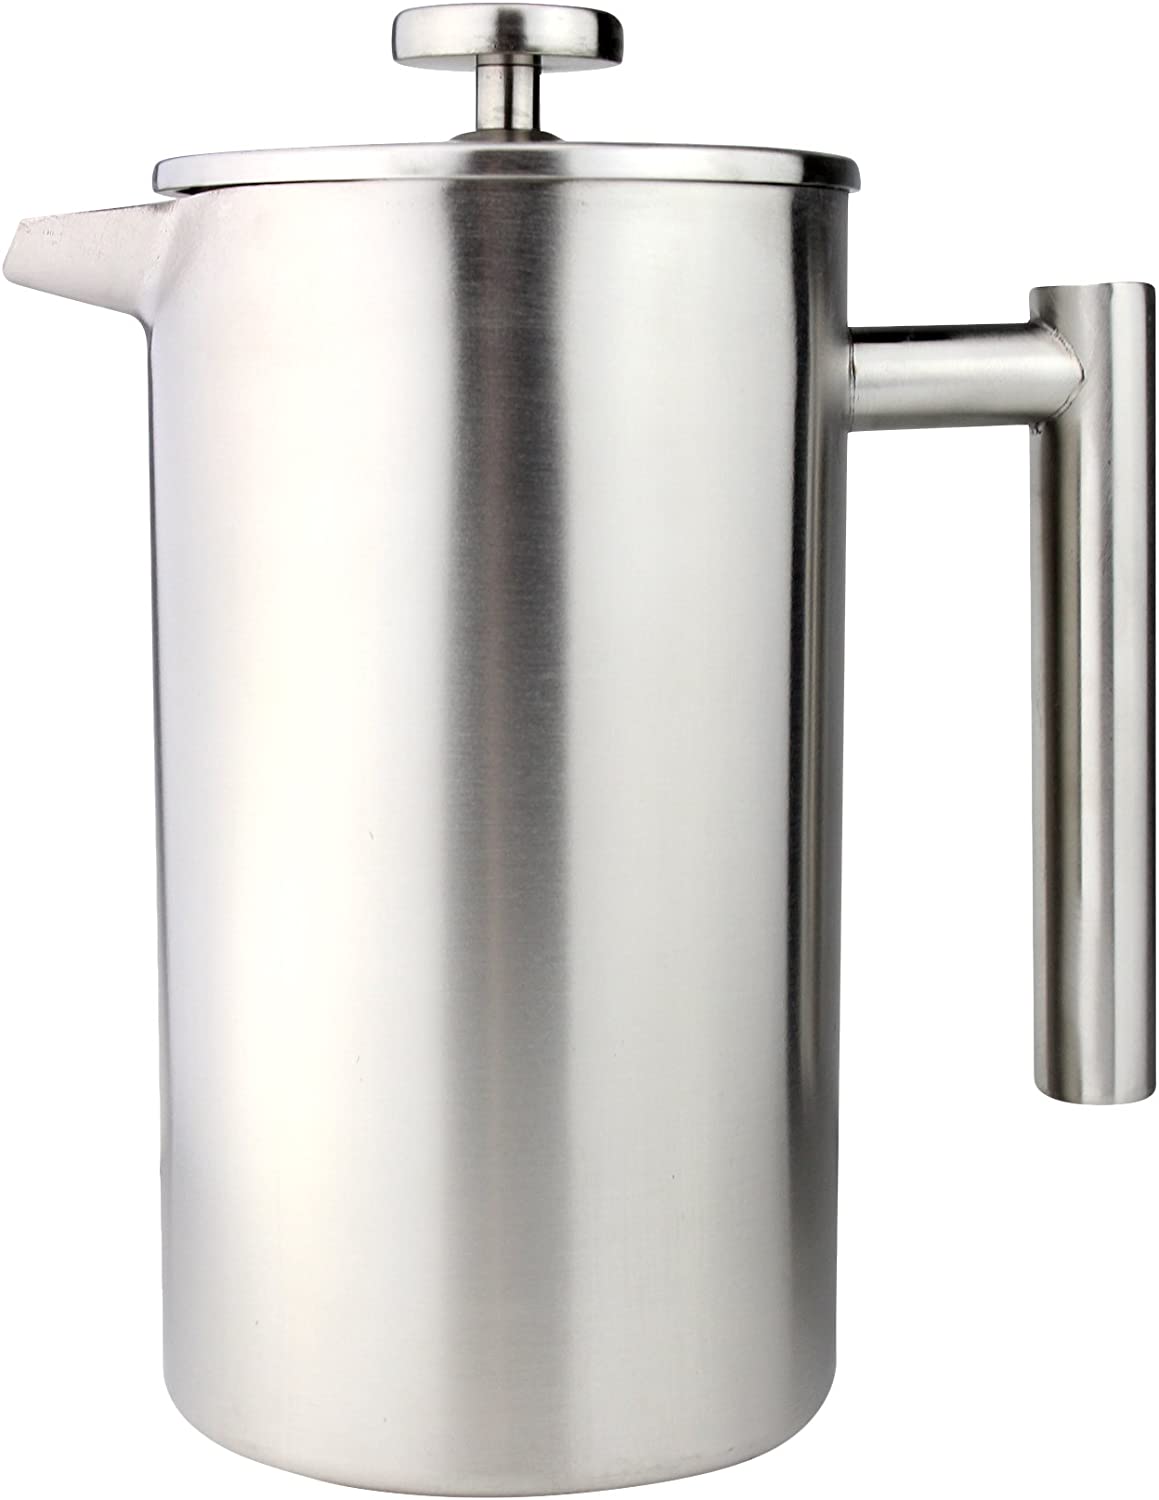 Cafe Ole Café Olé Stainless Steel Coffee Maker 800 ml 6 Espresso Cups Double-Walled Insulation with Cool-Touch Handles French Press with Stainless Steel Filter Lockable Spout Matt Brushed, Satin Finish